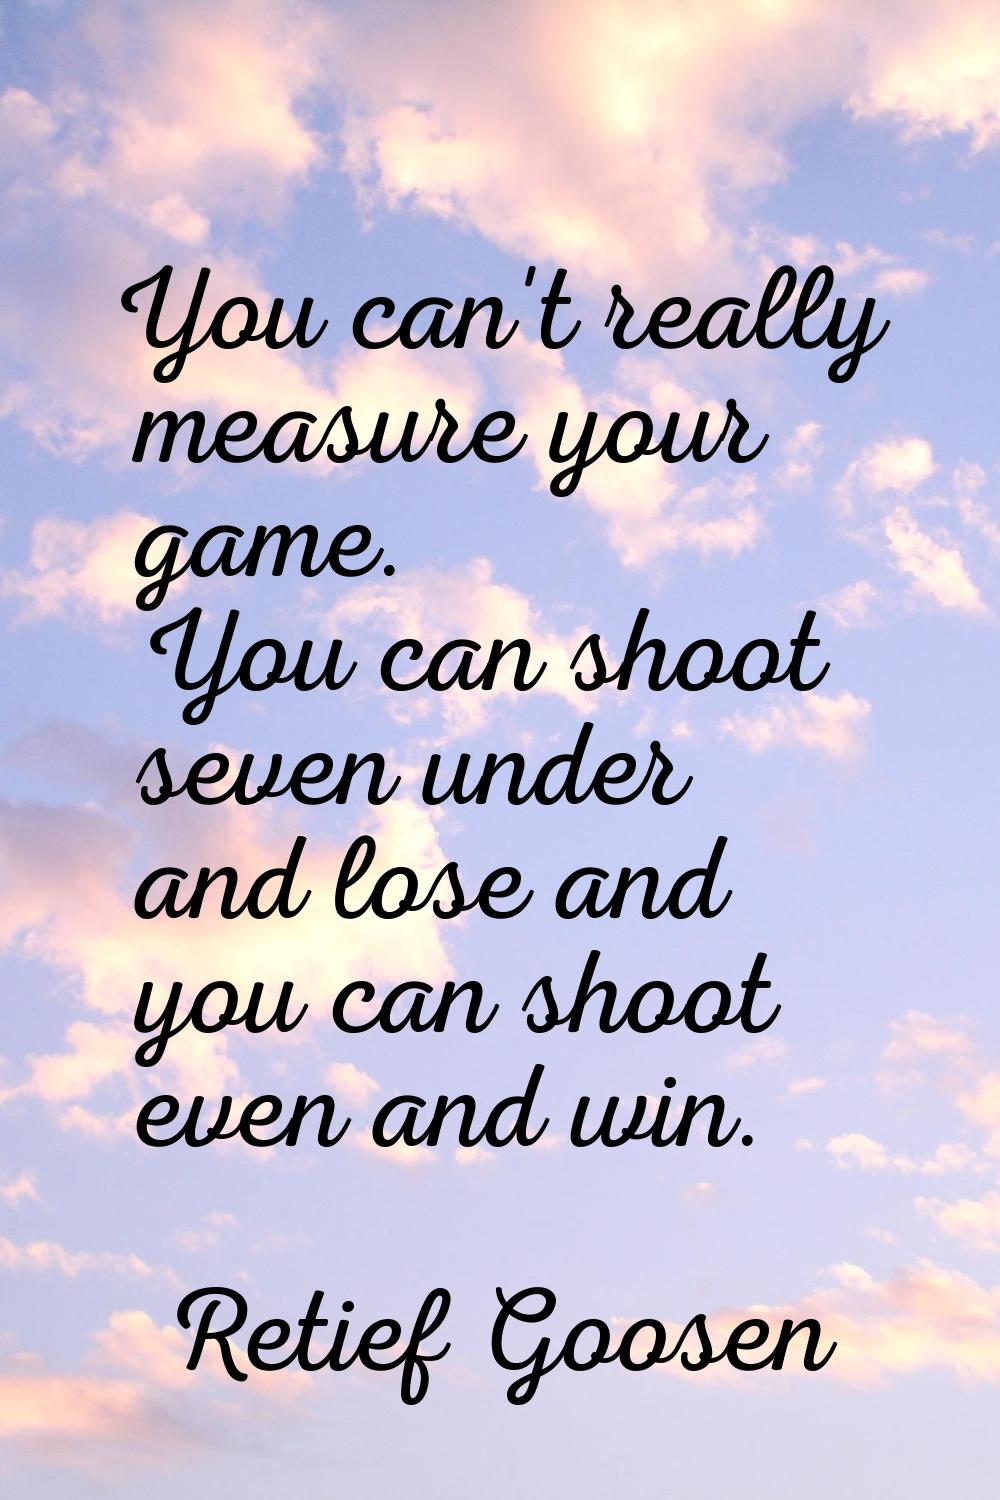 You can't really measure your game. You can shoot seven under and lose and you can shoot even and w